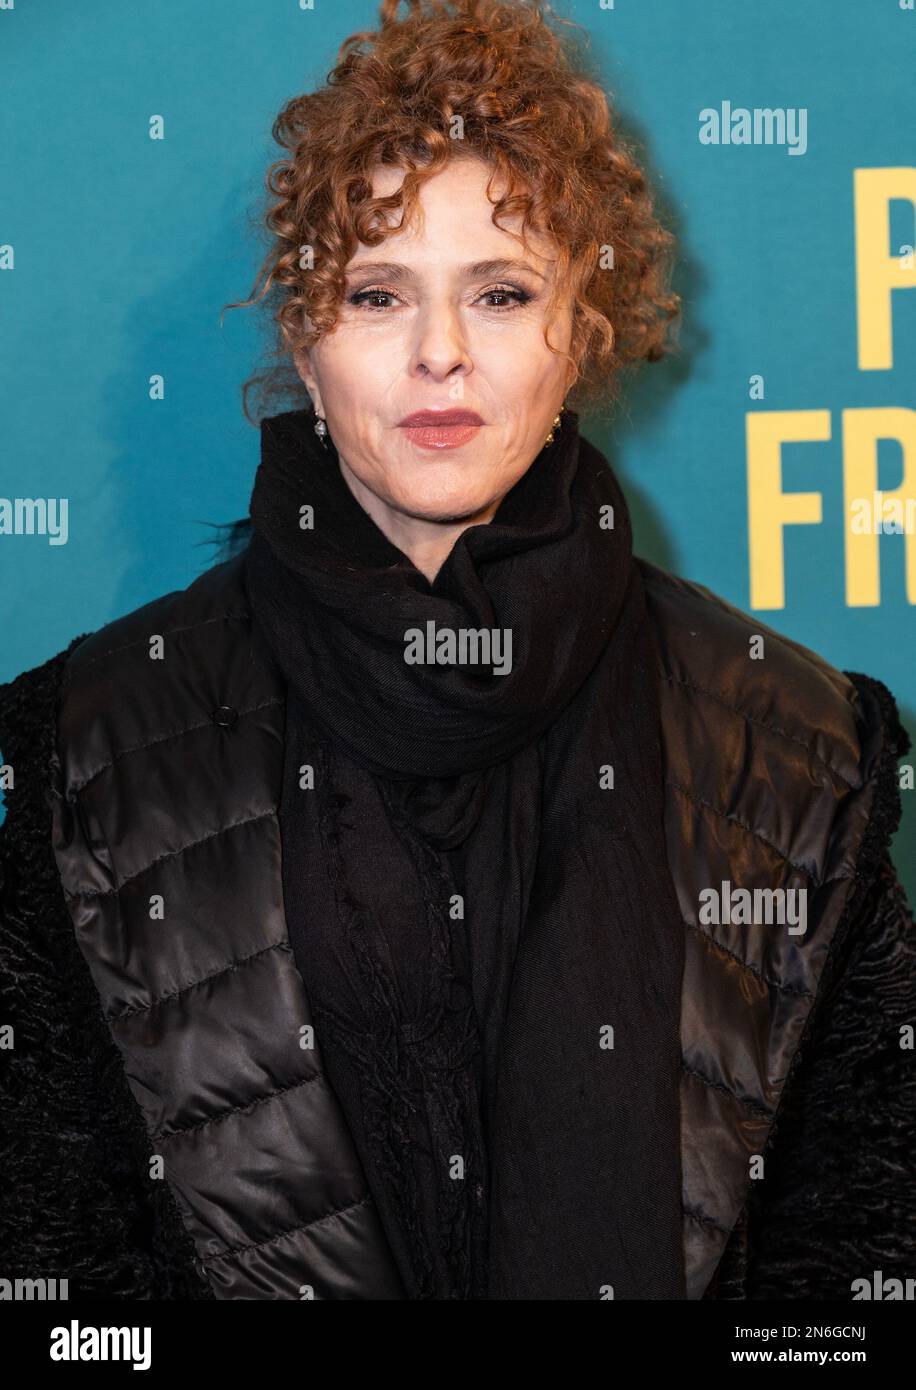 New York, us, February 9, 2023. Bernadette Peters attends the opening night of the play "Pictures From Home" on Broadway at The Studio 54 in New York on February 9, 2023. (Photo by Lev Radin/Sipa USA) Stock Photo